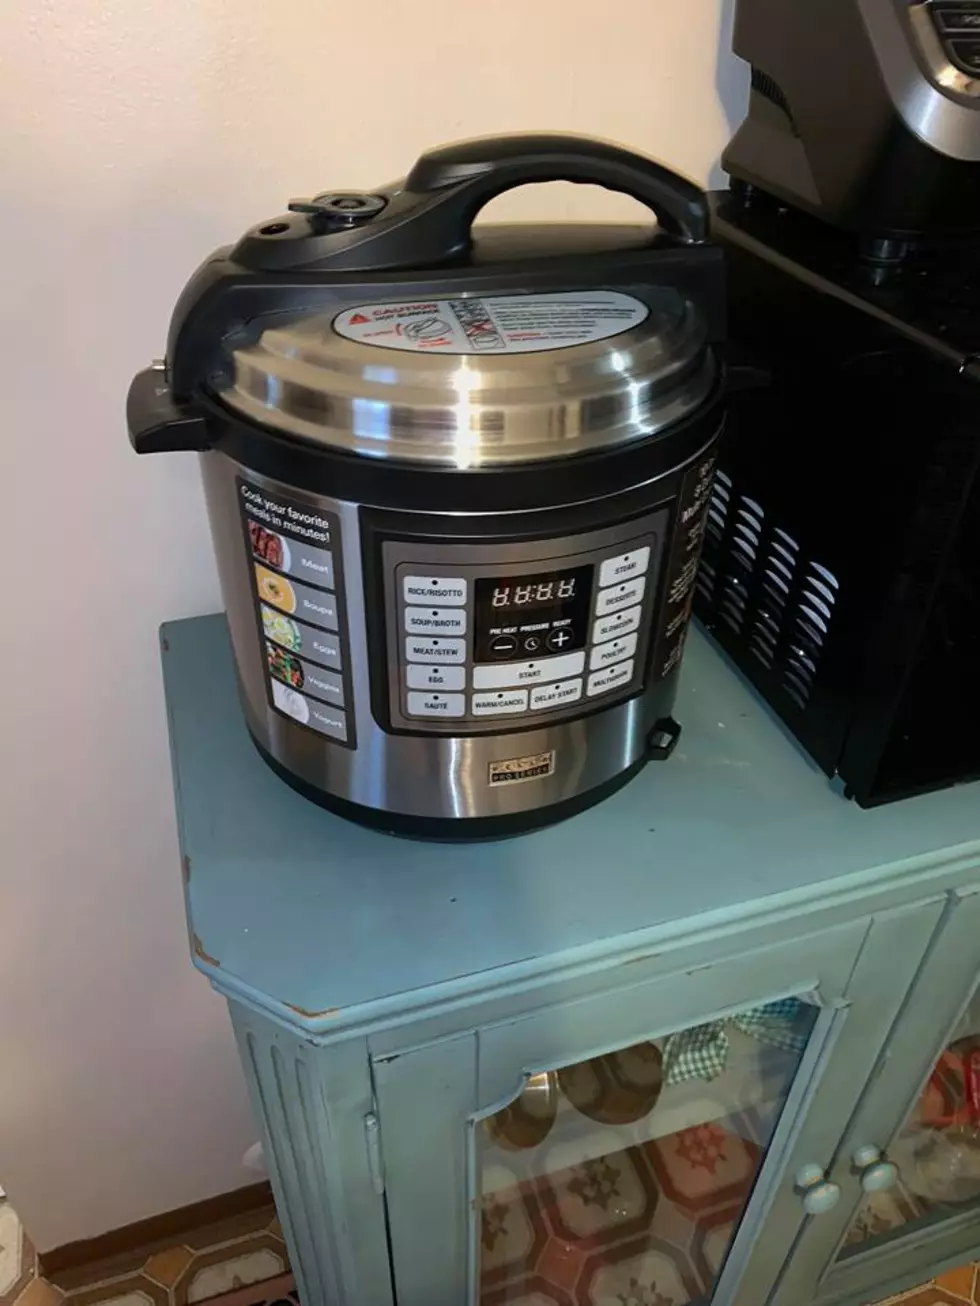 I’m Now a Member of the Instant Pot Family